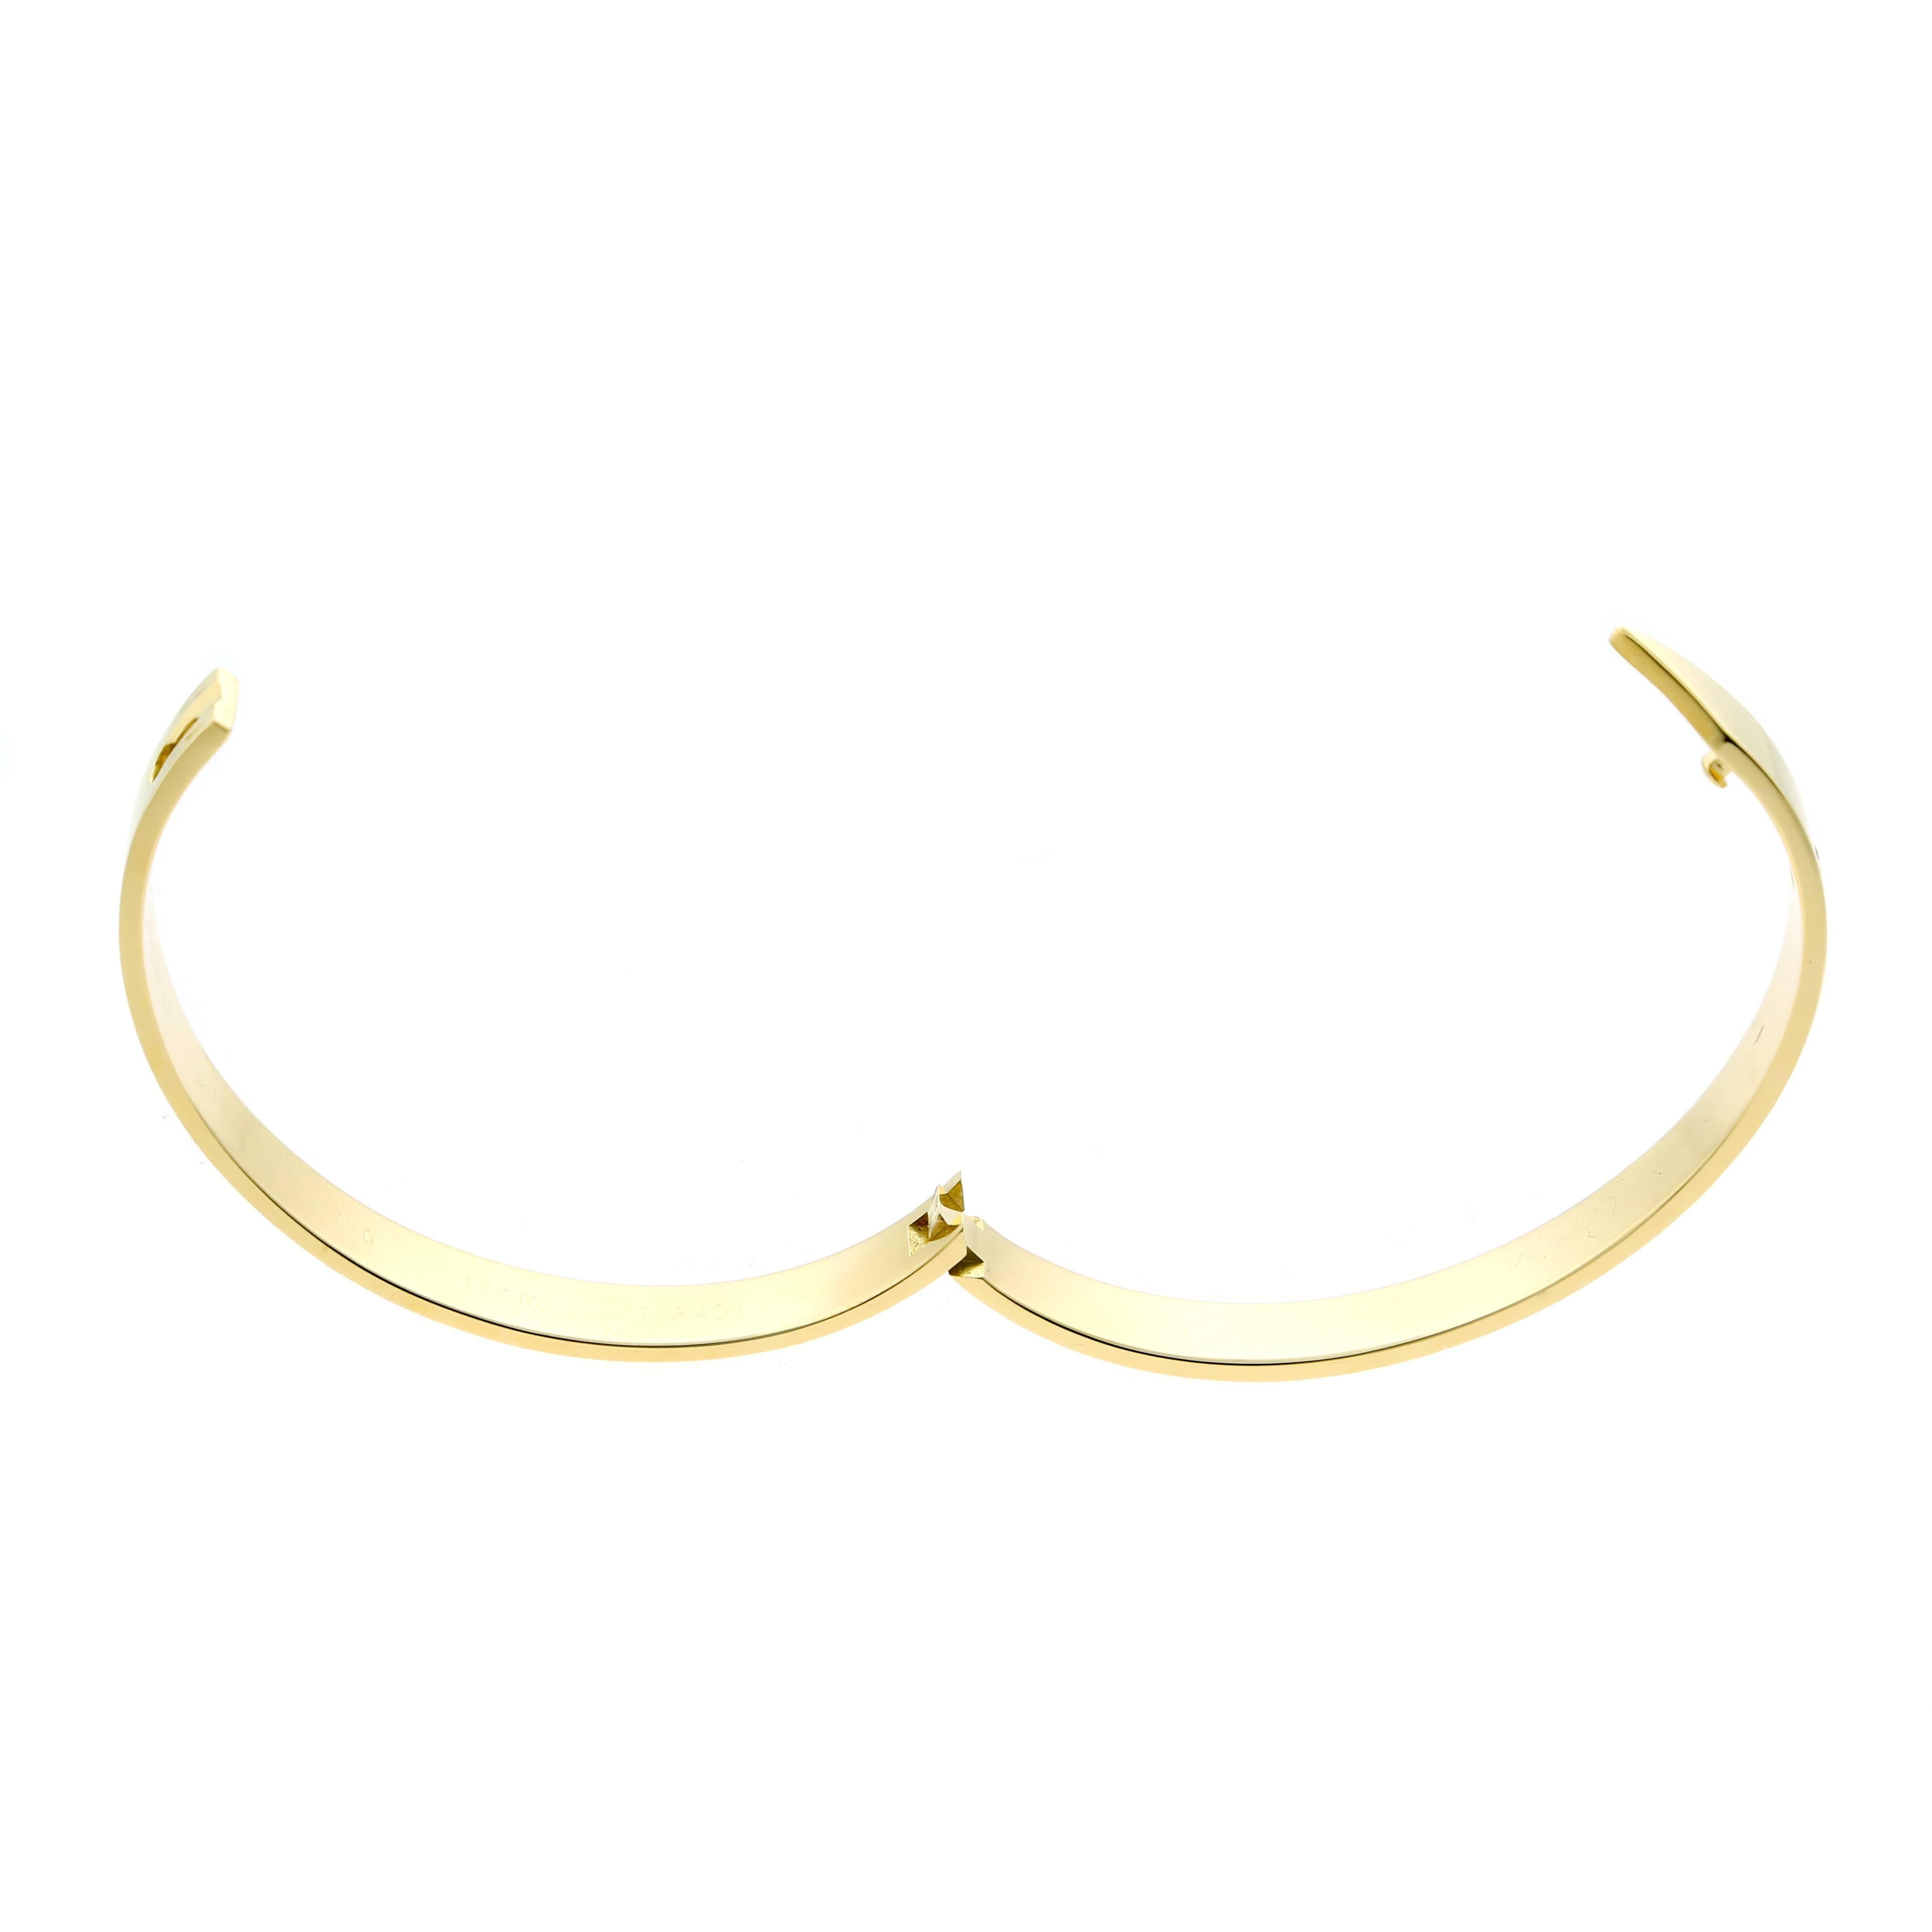 A chic authentic Cartier Anniversary bangle featuring a single .10ct Cartier round brilliant cut diamond set in 18k yellow gold.

Bracelet Size: 18cm  - 7.08